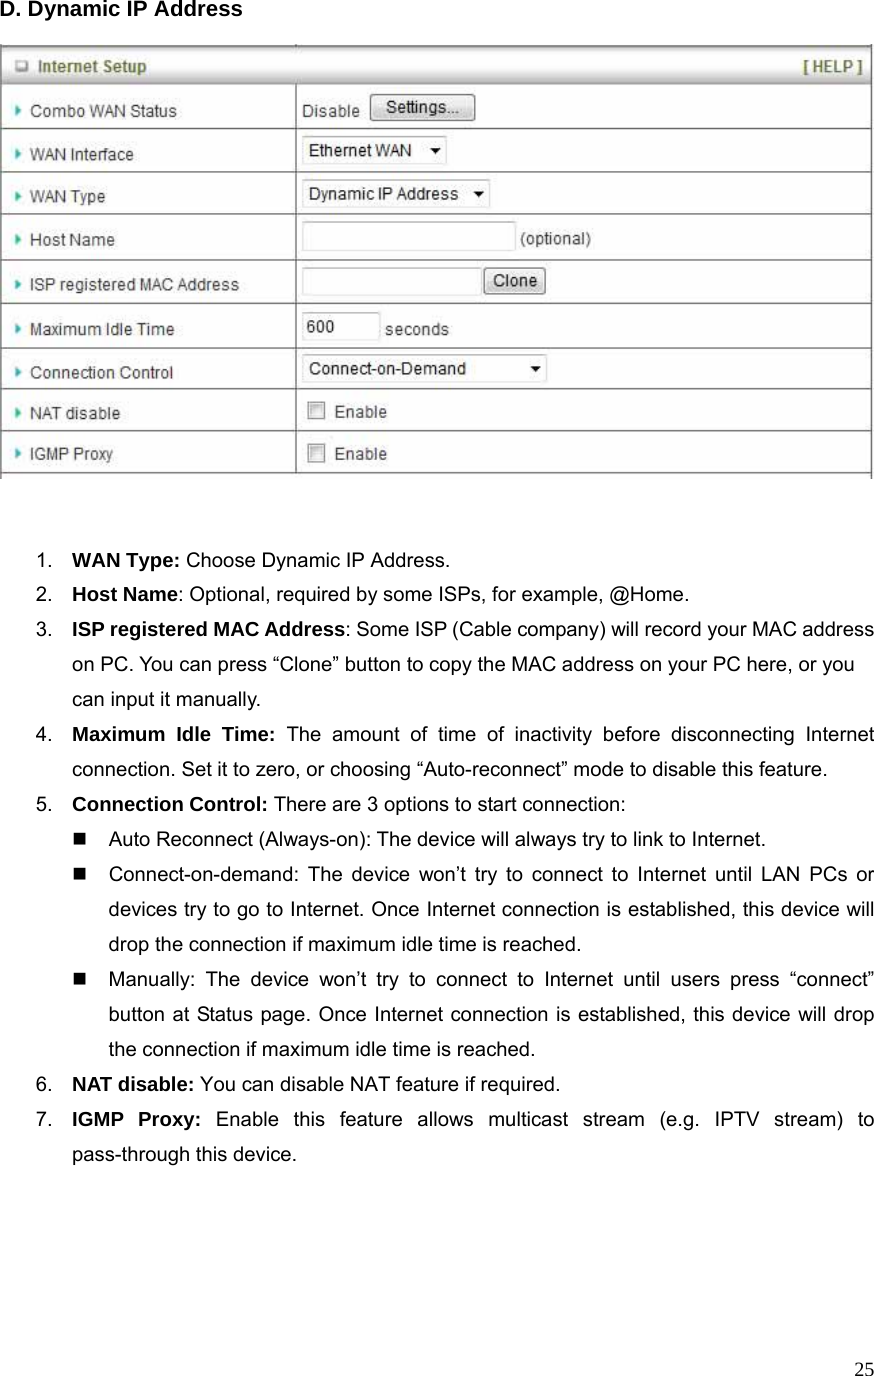  25D. Dynamic IP Address      1.  WAN Type: Choose Dynamic IP Address. 2.  Host Name: Optional, required by some ISPs, for example, @Home. 3.  ISP registered MAC Address: Some ISP (Cable company) will record your MAC address on PC. You can press “Clone” button to copy the MAC address on your PC here, or you can input it manually. 4.  Maximum Idle Time: The amount of time of inactivity before disconnecting Internet connection. Set it to zero, or choosing “Auto-reconnect” mode to disable this feature.   5.  Connection Control: There are 3 options to start connection:     Auto Reconnect (Always-on): The device will always try to link to Internet.       Connect-on-demand: The device won’t try to connect to Internet until LAN PCs or devices try to go to Internet. Once Internet connection is established, this device will drop the connection if maximum idle time is reached.   Manually: The device won’t try to connect to Internet until users press “connect” button at Status page. Once Internet connection is established, this device will drop the connection if maximum idle time is reached. 6.  NAT disable: You can disable NAT feature if required. 7.  IGMP Proxy: Enable this feature allows multicast stream (e.g. IPTV stream) to pass-through this device.      